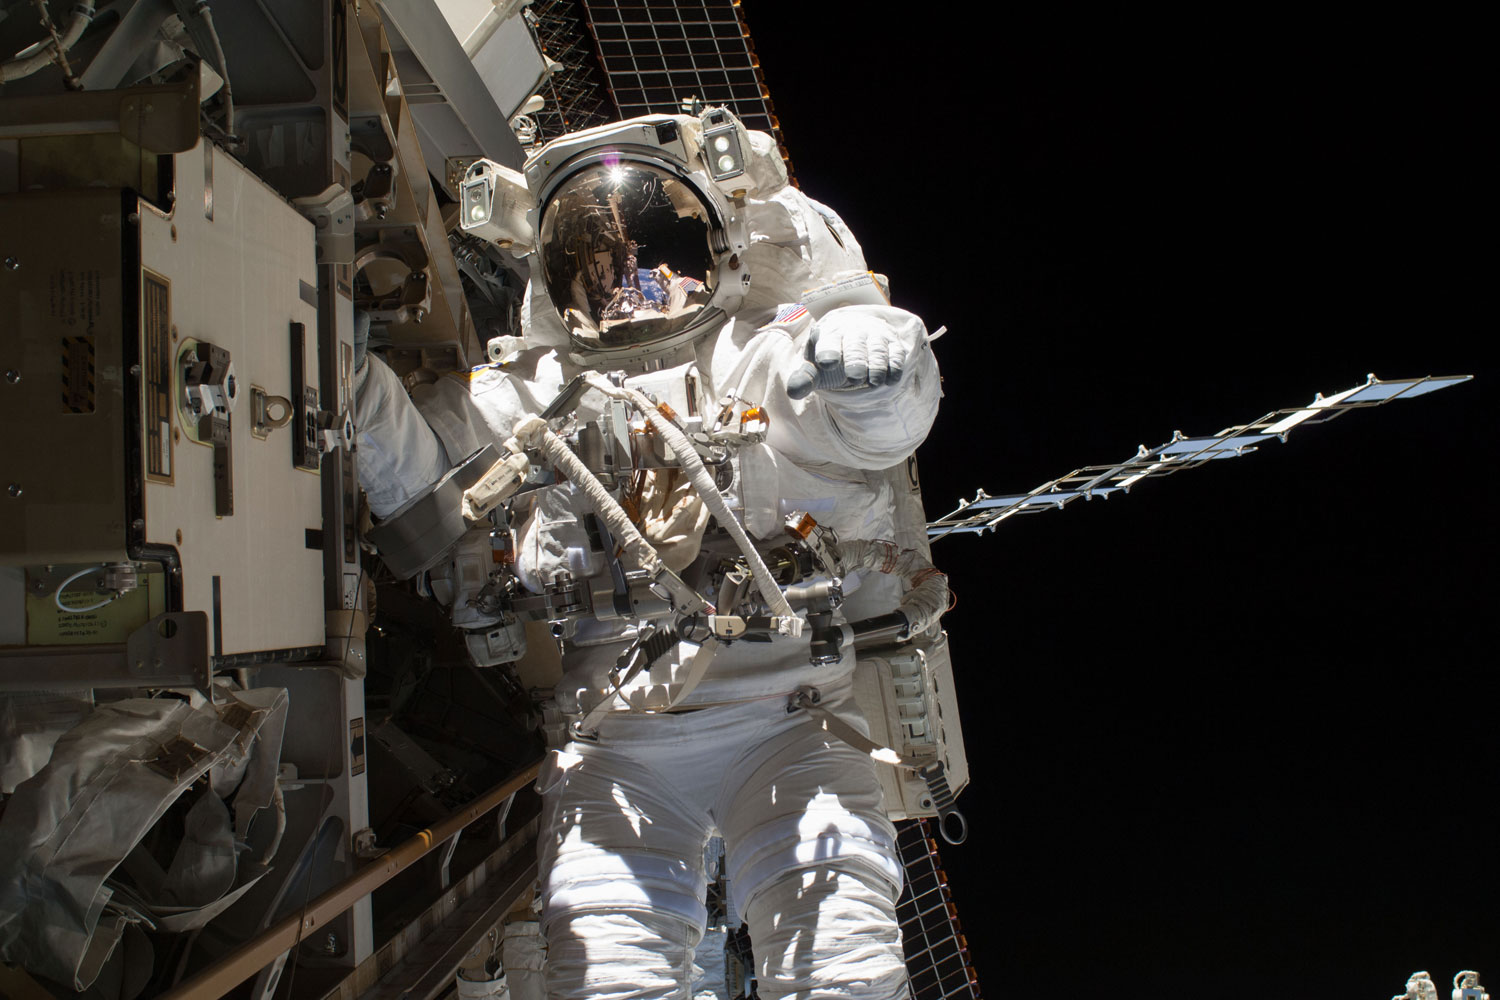 Astronaut Steve Swanson during a spacewalk to replace a failed backup computer relay box on the International Space Station on April 22, 2014.